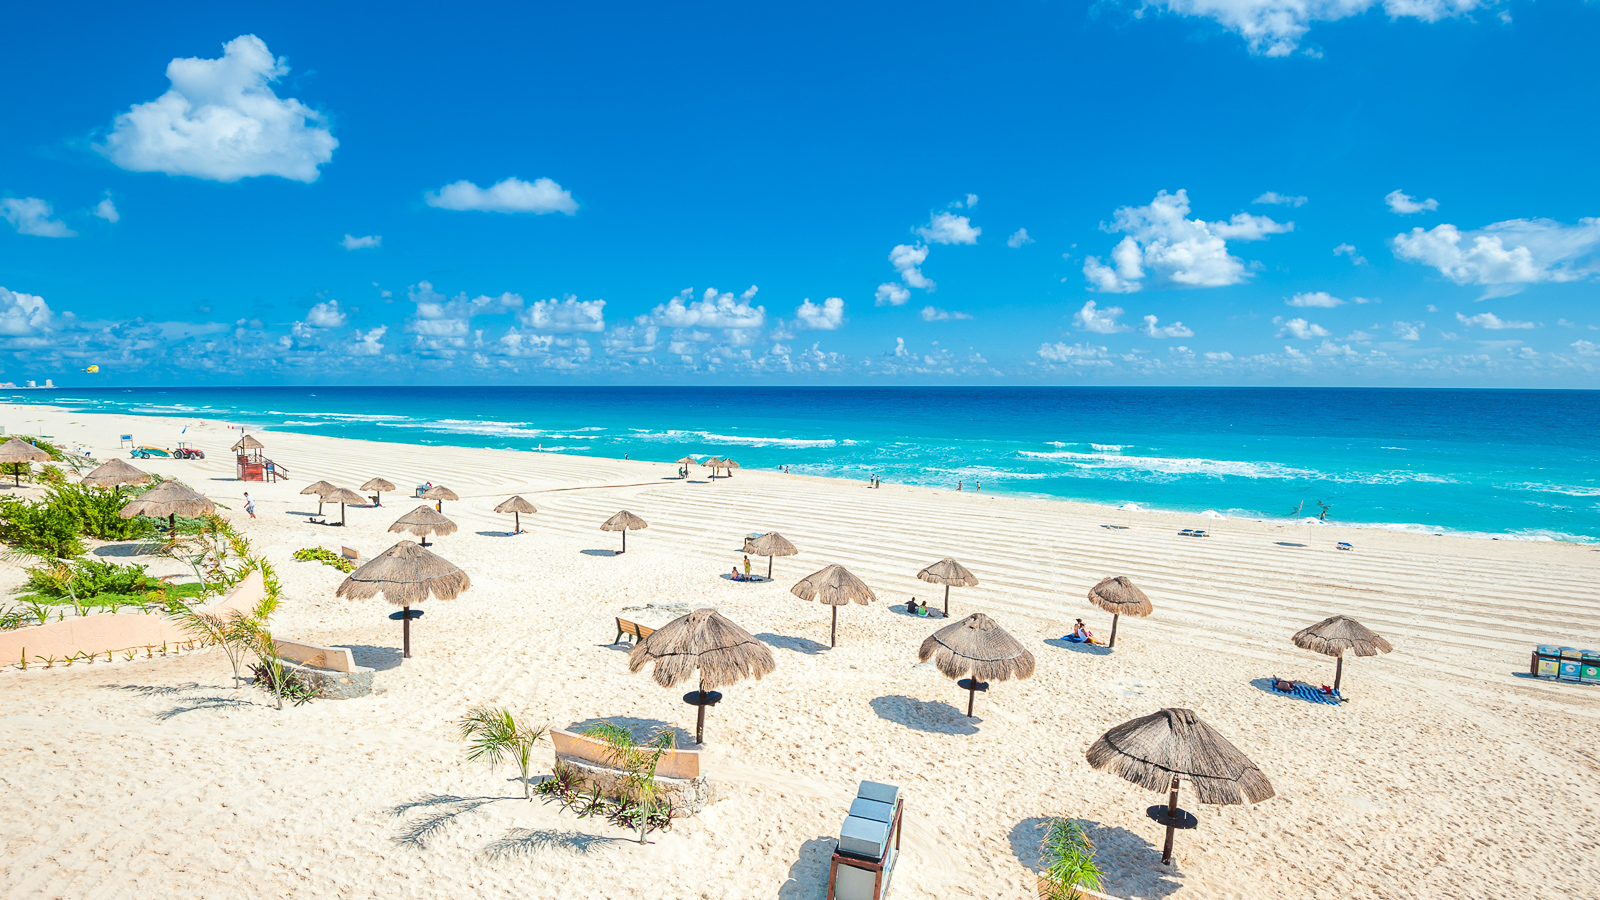 21 Best Things To Do in Cancun, Mexico